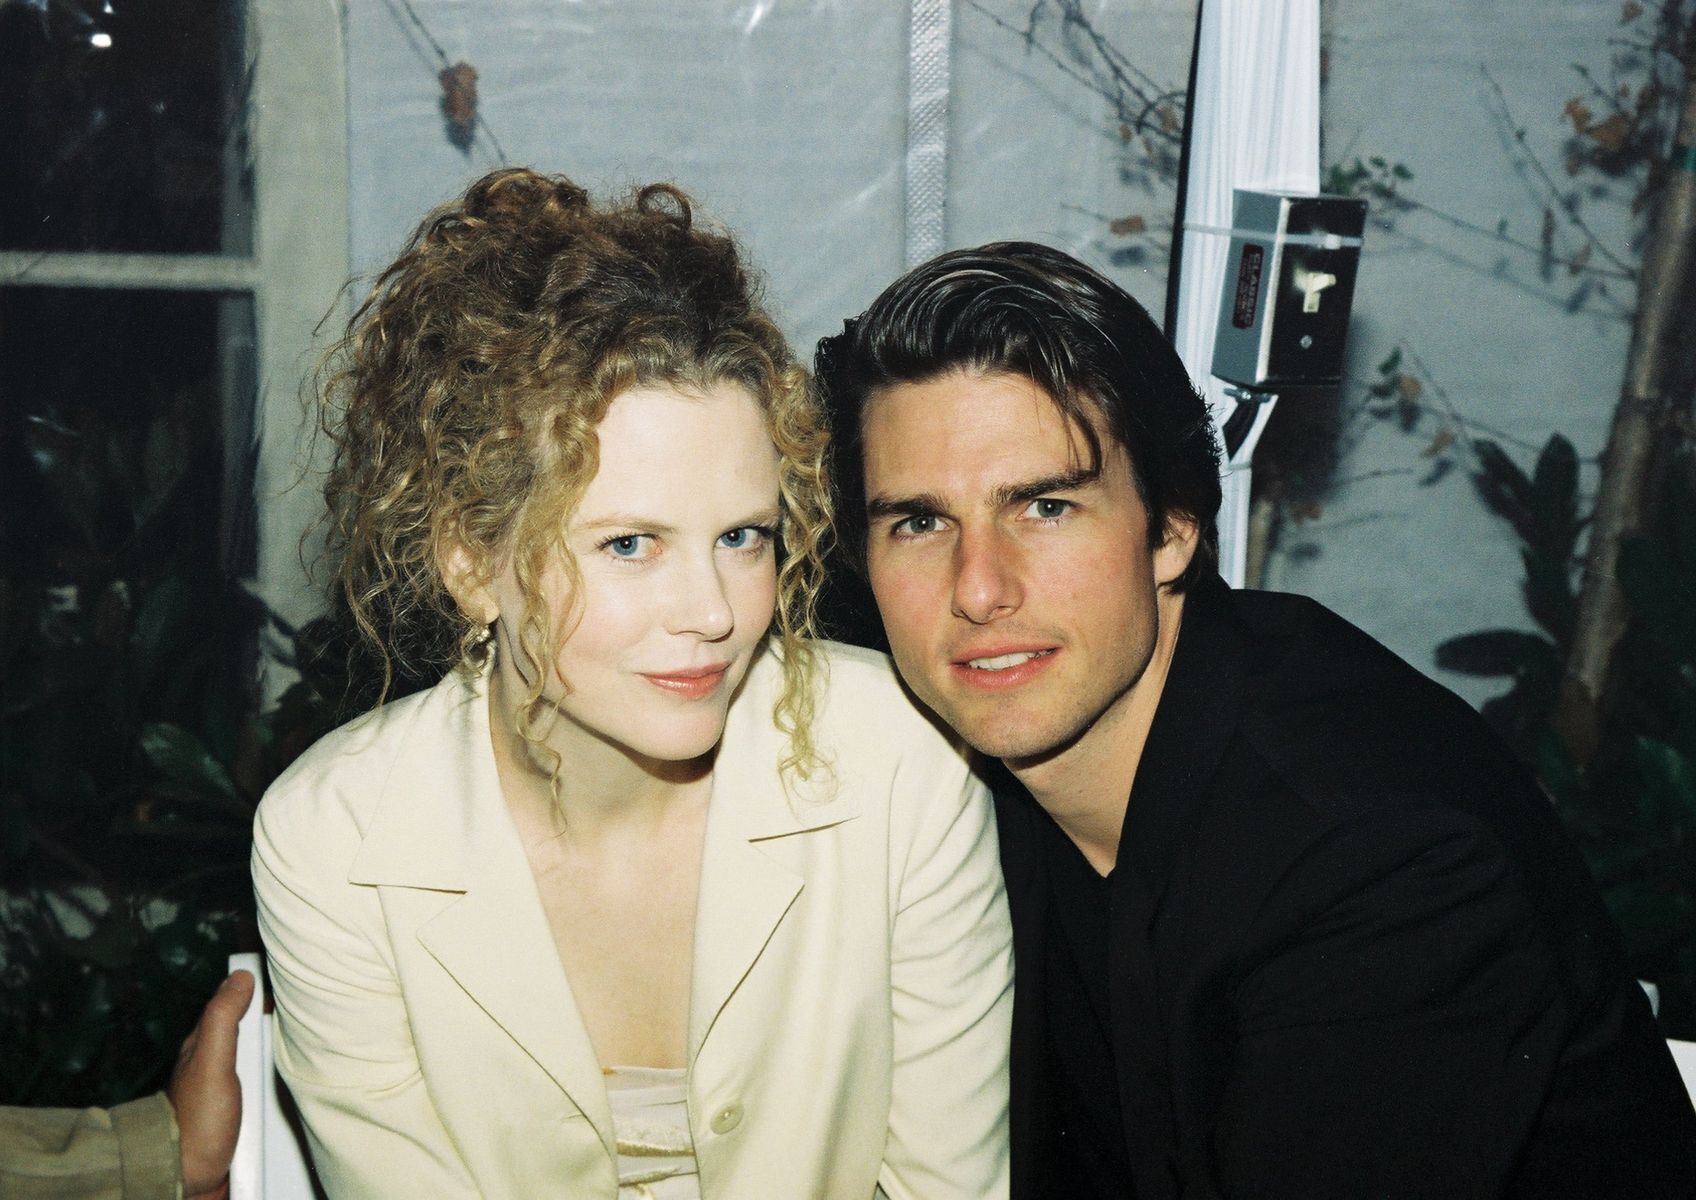 <p>“He basically swept me off my feet,” Kidman told <a href="https://www.vanityfair.com/hollywood/2002/12/kidman-200212" class="atom_link atom_valid"><em>Vanity Fair</em></a> in 2002. The duo went on to adopt two children: Isabella (Bella) Cruise, who was born in 1992, and Connor Cruise, born in 1995. The relationship lasted a decade before Cruise filed for divorce in 2001. </p>